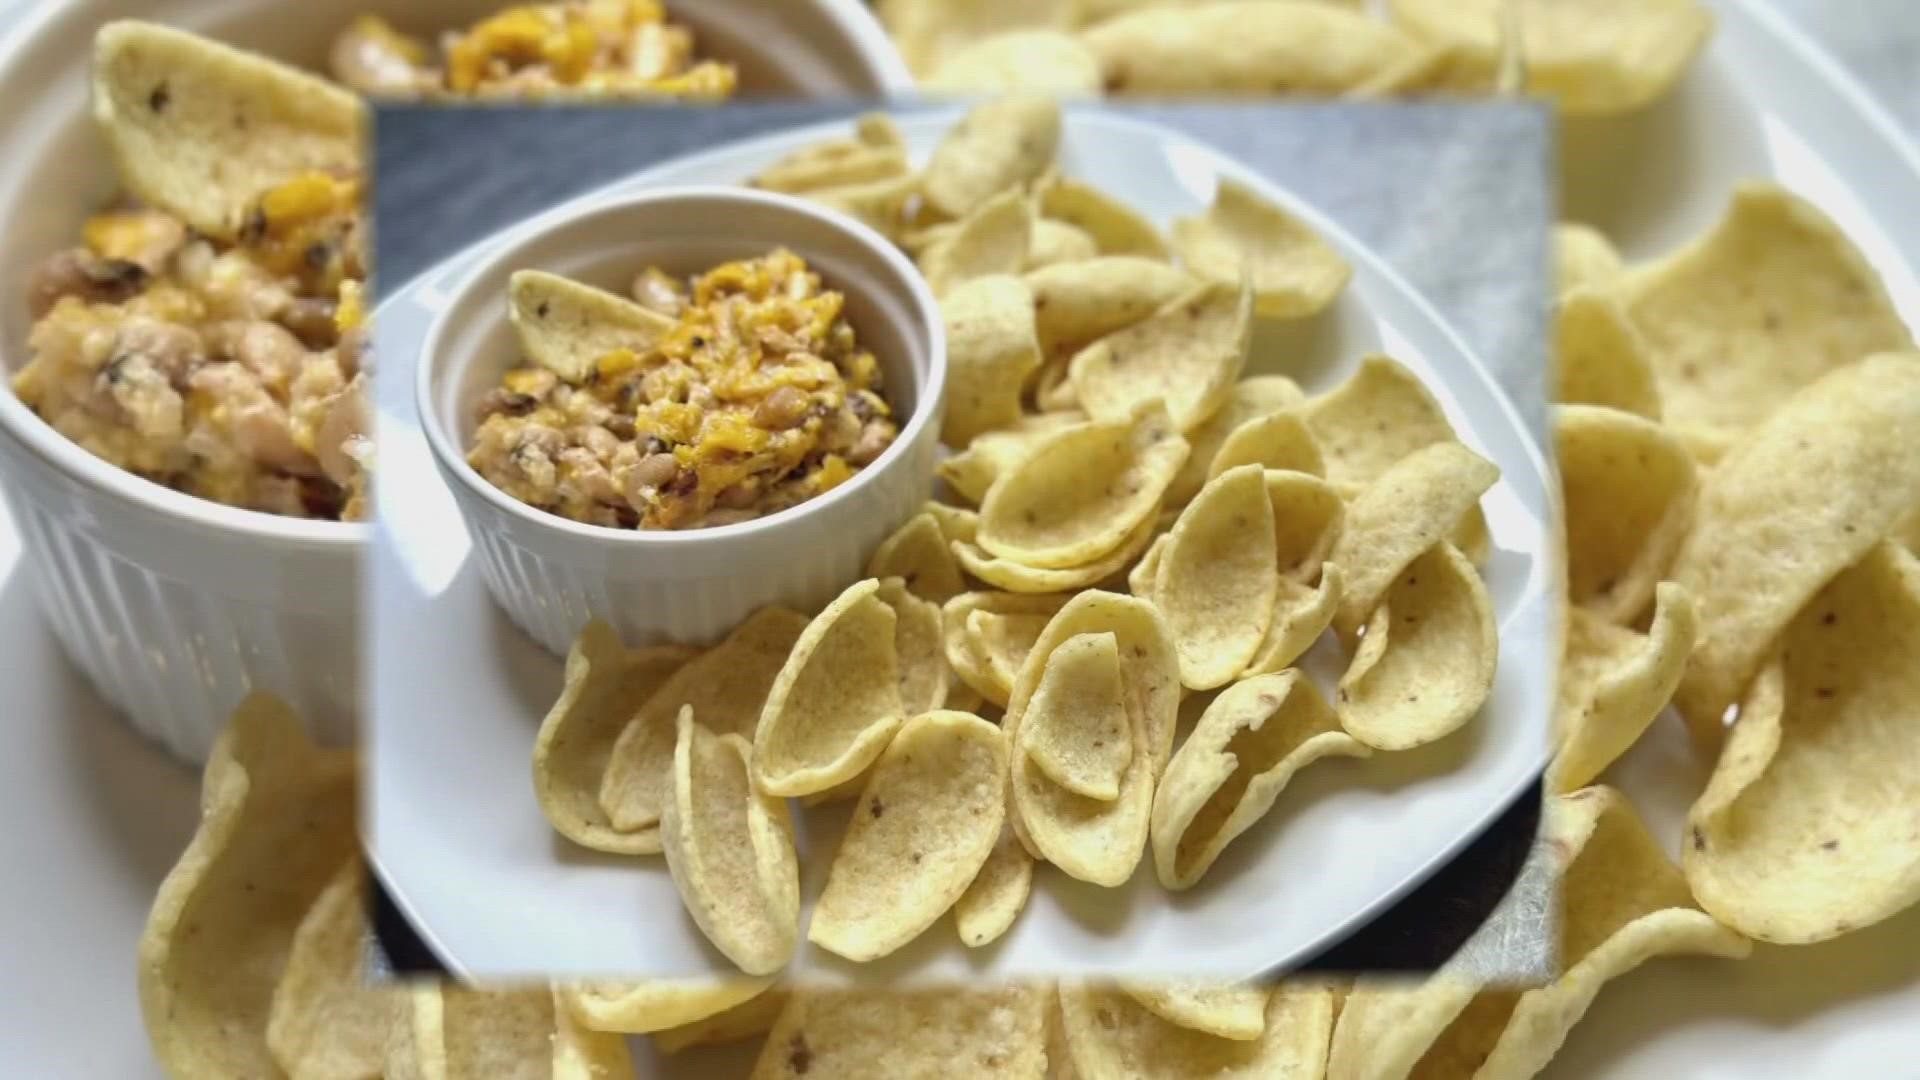 Ring in the New Year with this dip that will be great for any occasion.